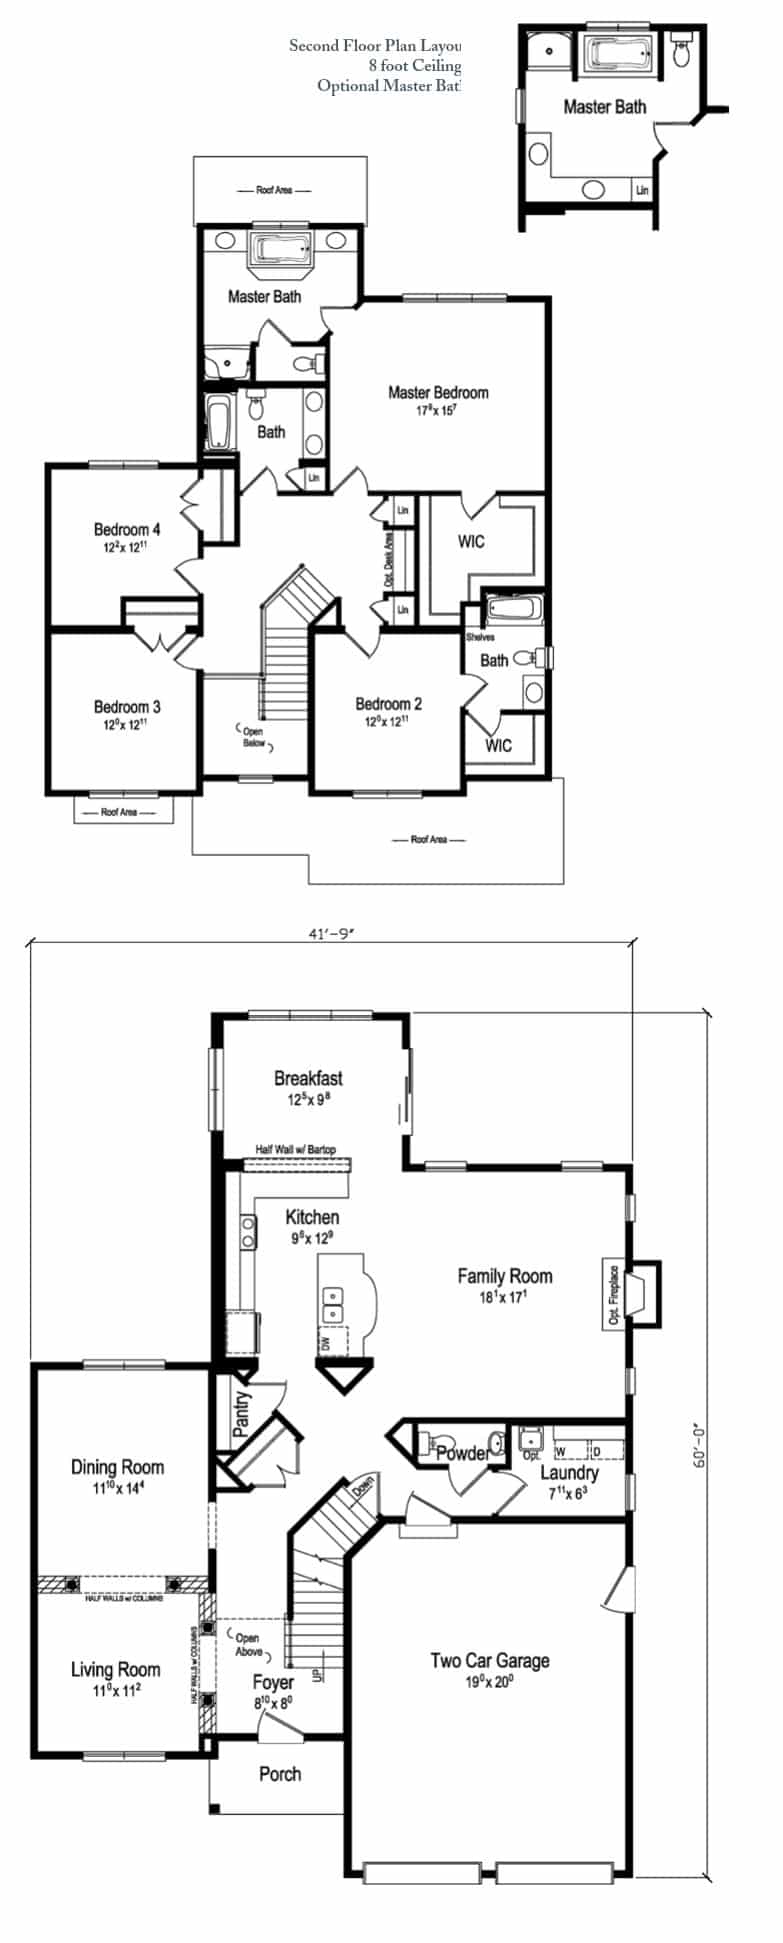 The Devlyn Two Story Home Floor Plan